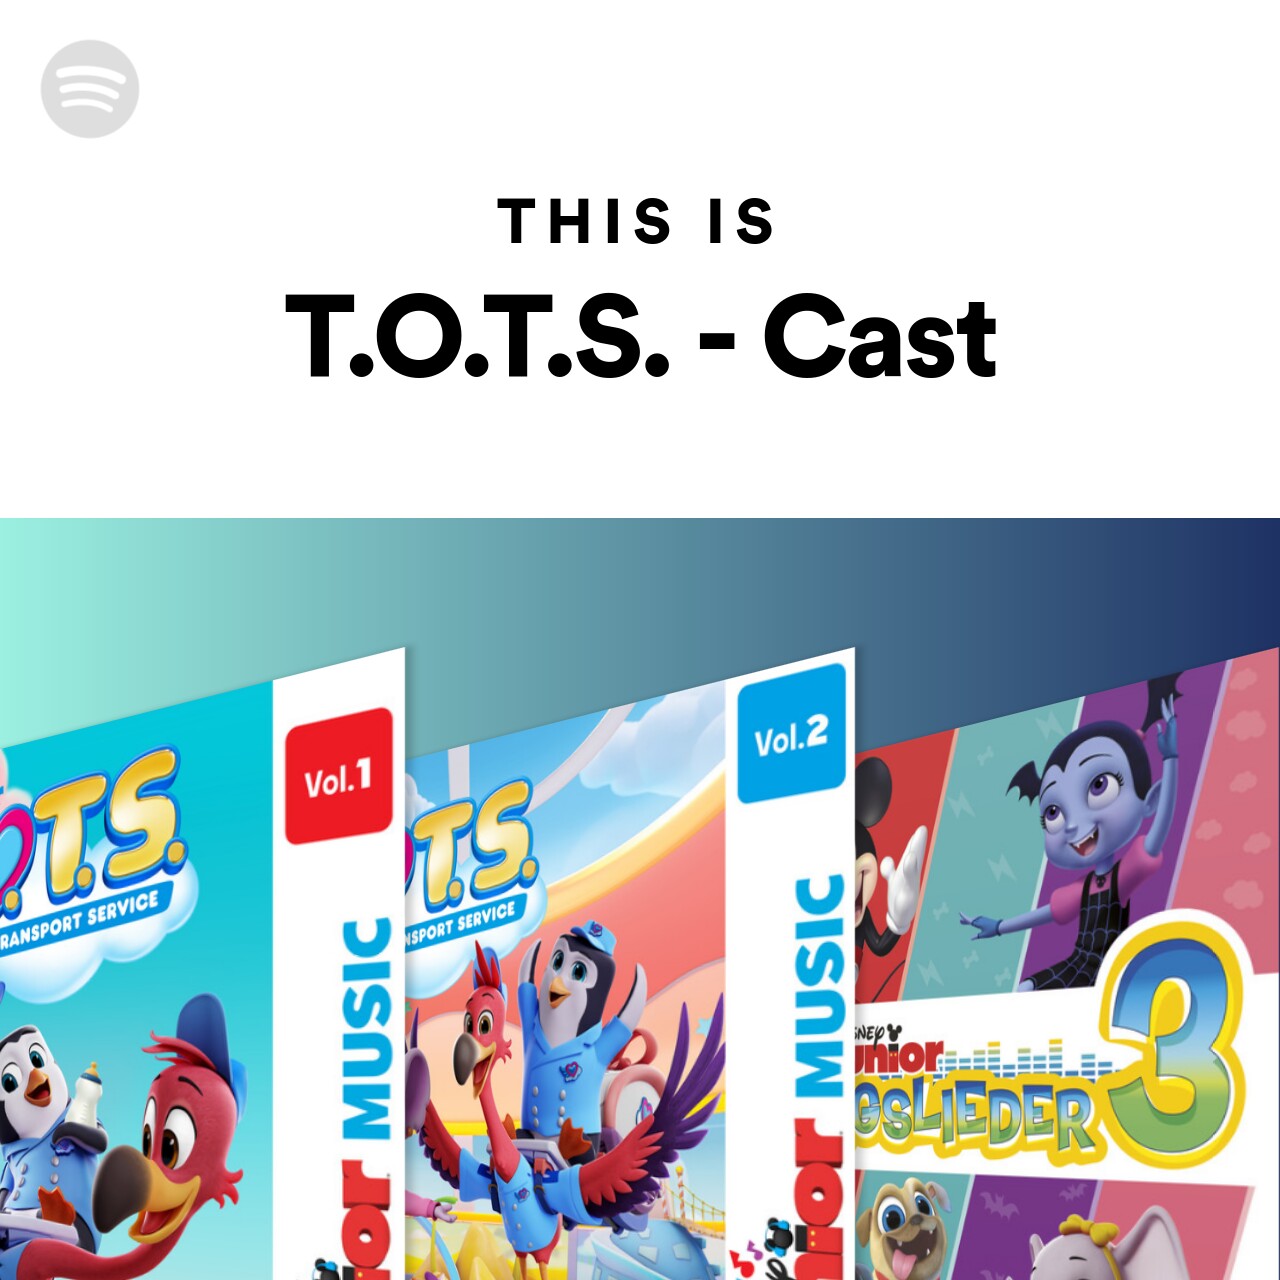 This Is T.O.T.S. - Cast